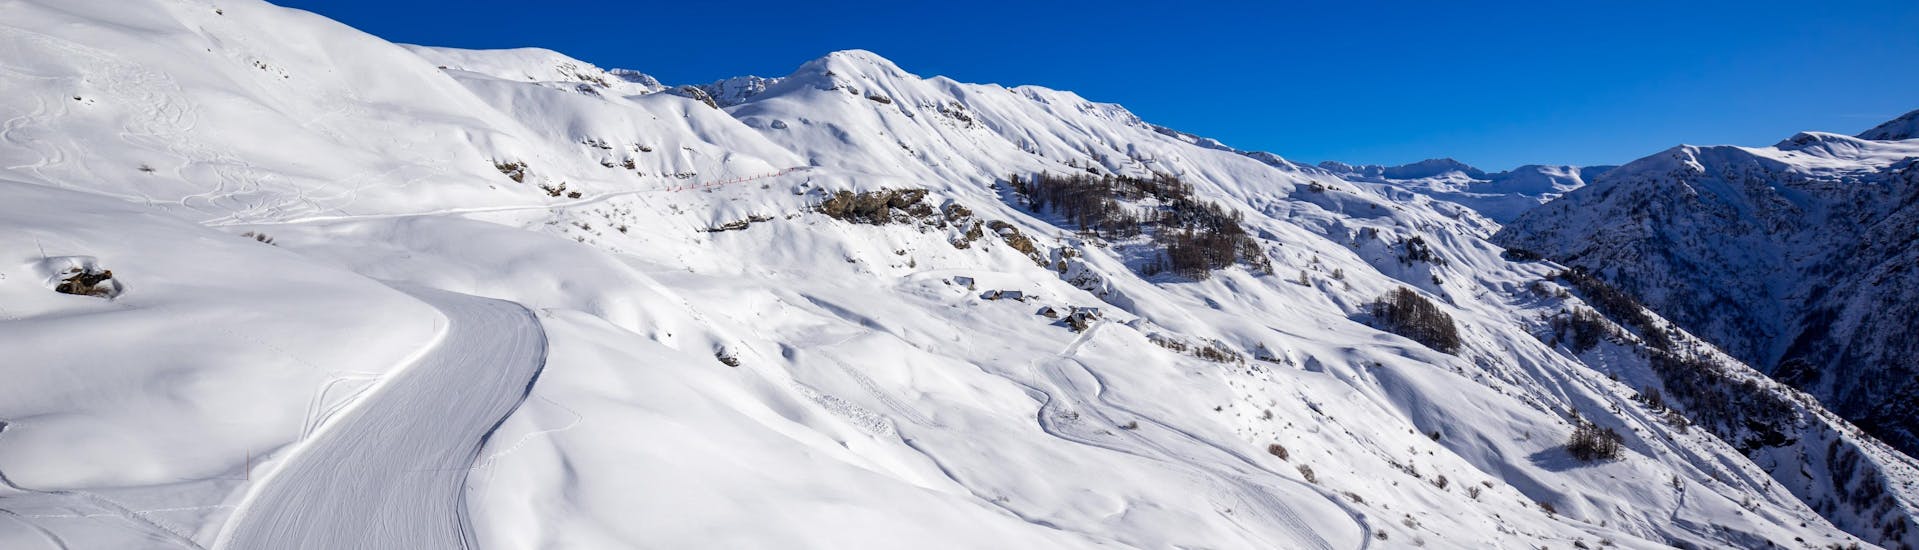 View of the snow covered mountain landscape of the ski resort Orcières Merlette 1850, where local ski schools offer their ski lessons.